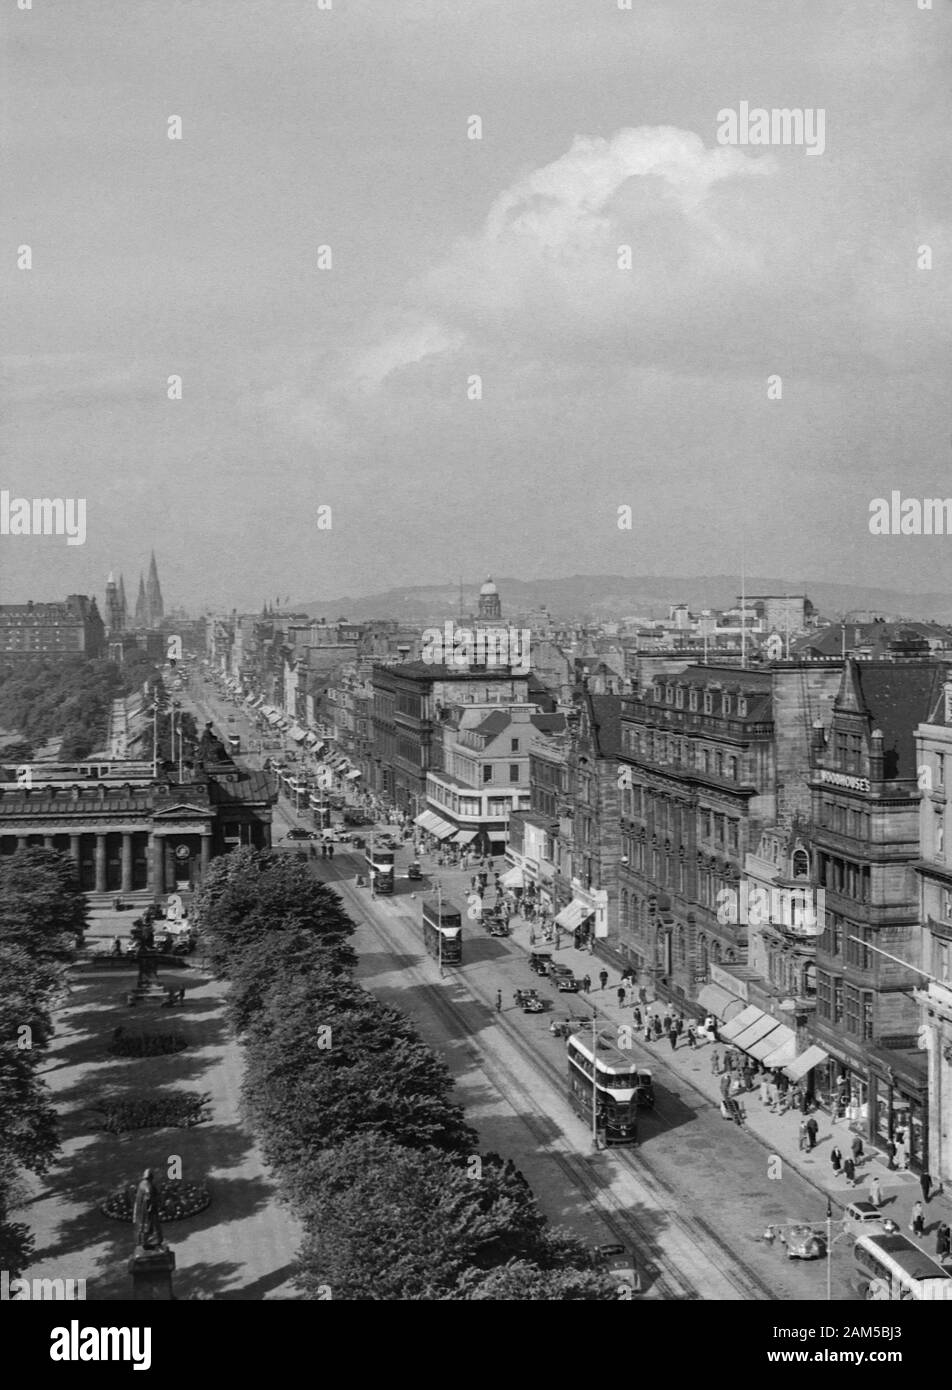 Princes Street, Edinburgh during the 1950s note the original trams on route Stock Photo